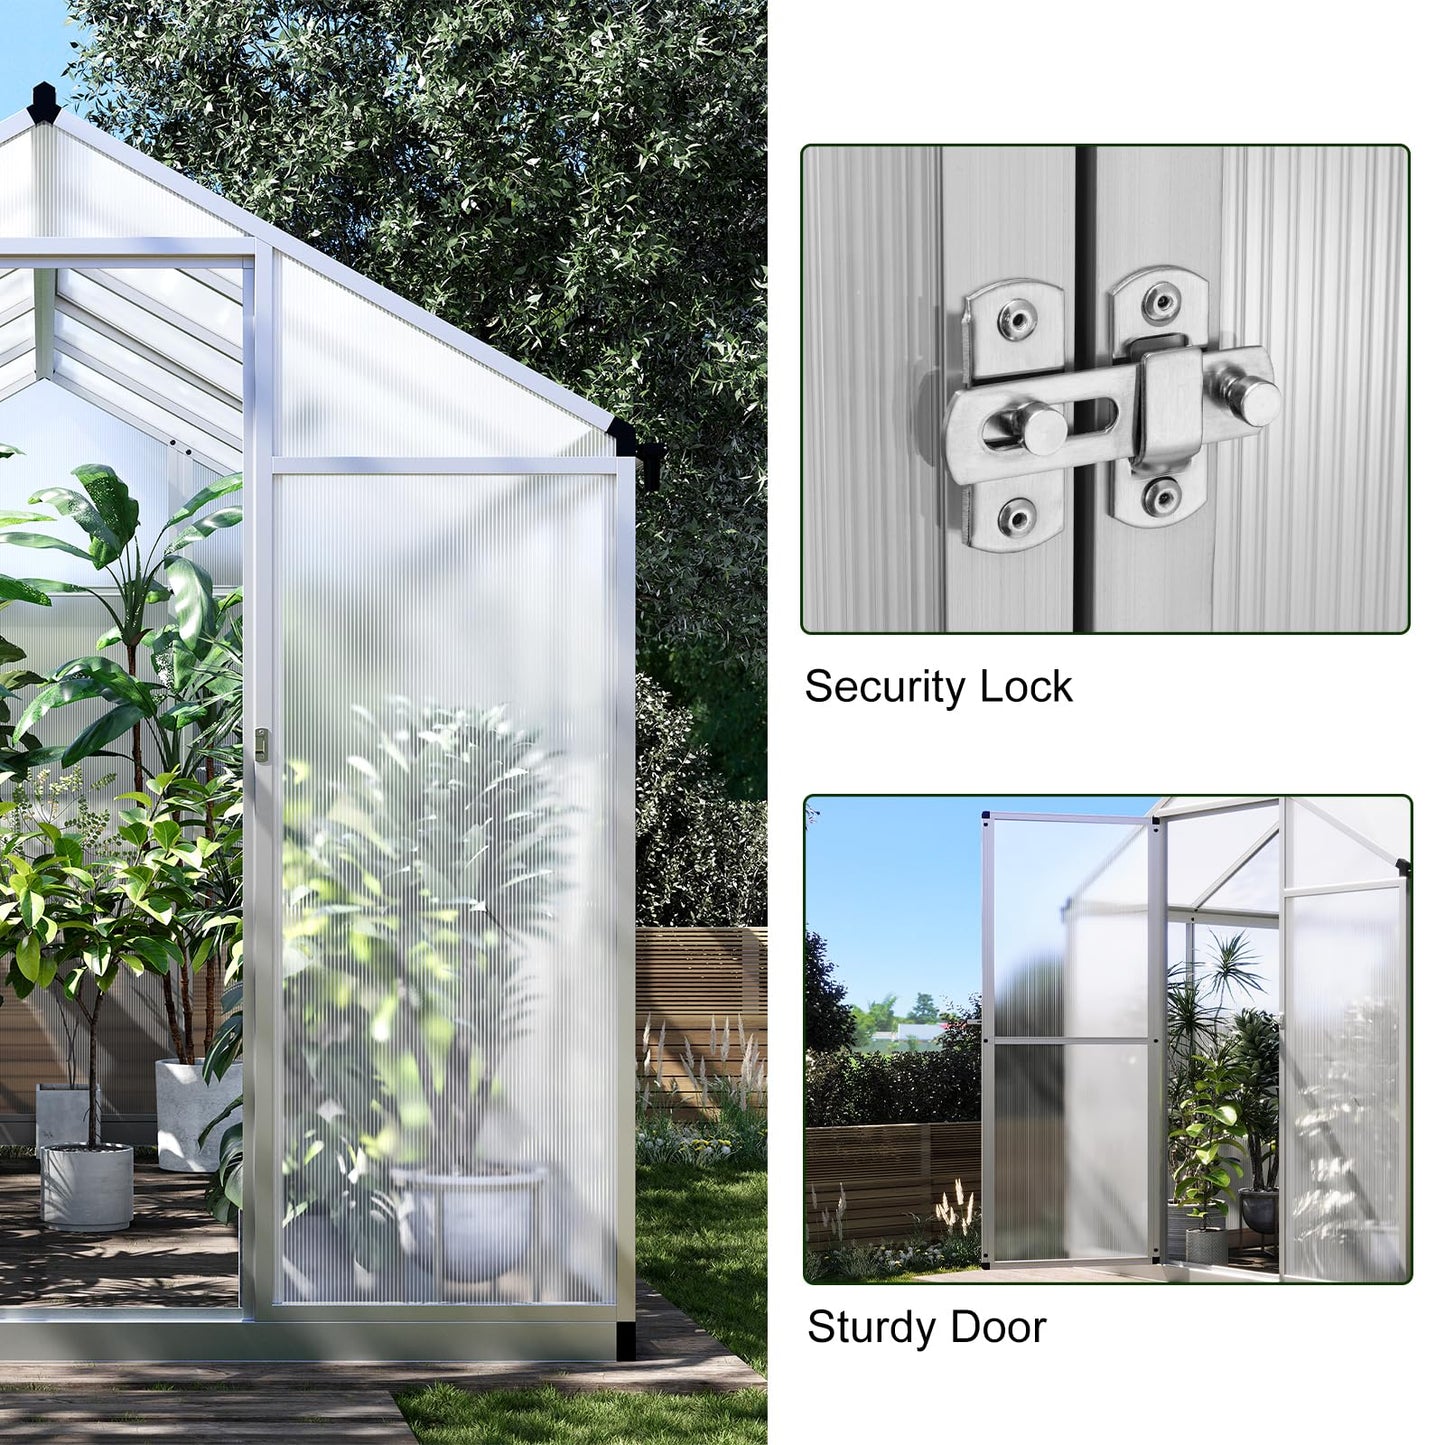 6x10 FT Greenhouse for Outdoors, Polycarbonate Greenhouse with Quick Setup Structure and Roof Vent, Aluminum Large Walk-in Greenhouse for Outside Garden Backyard, Silver